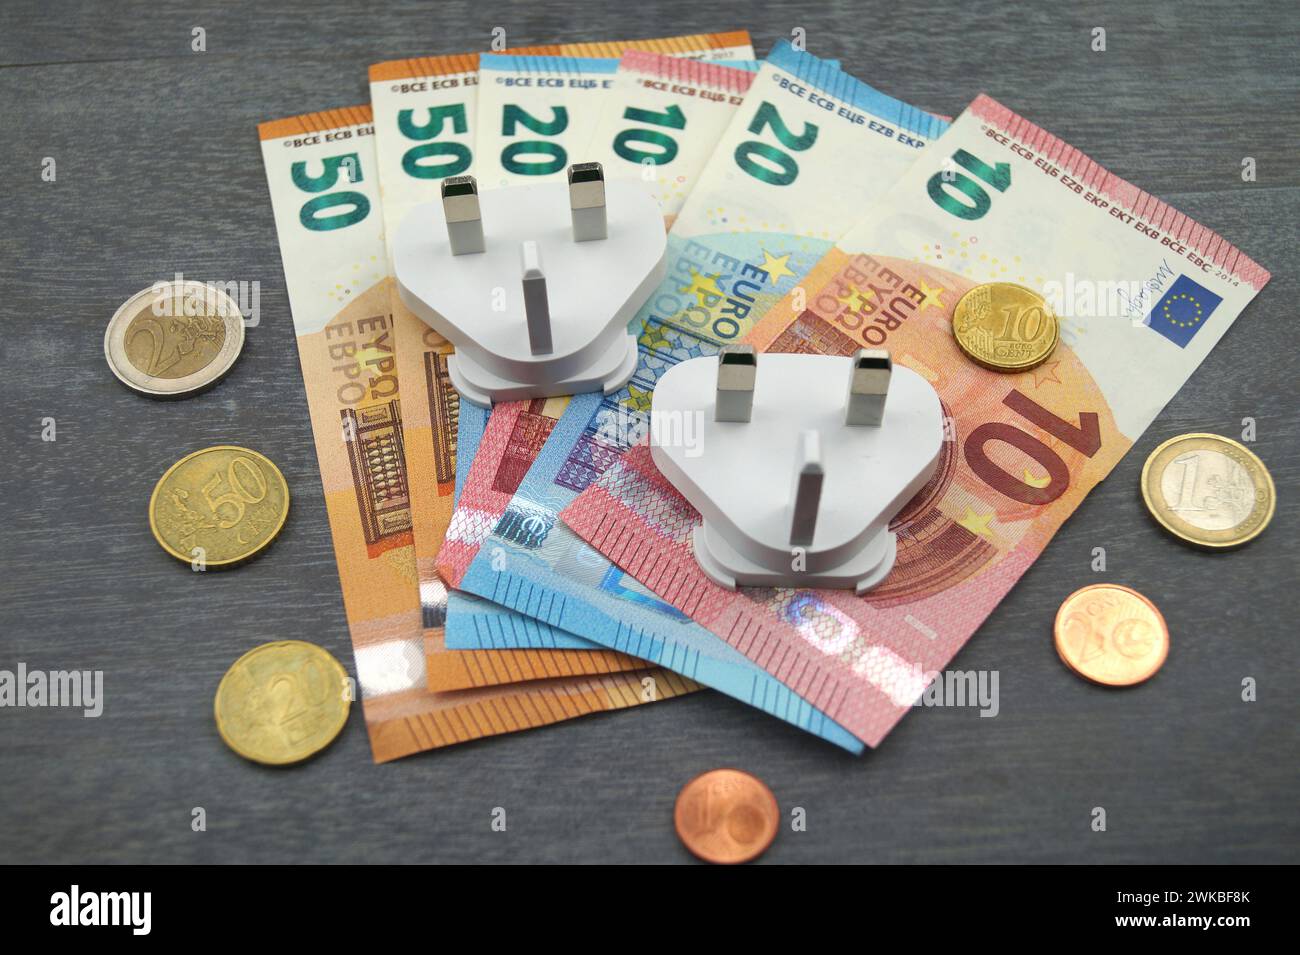 Plugs and money, symbolic image of electricity costs Stock Photo